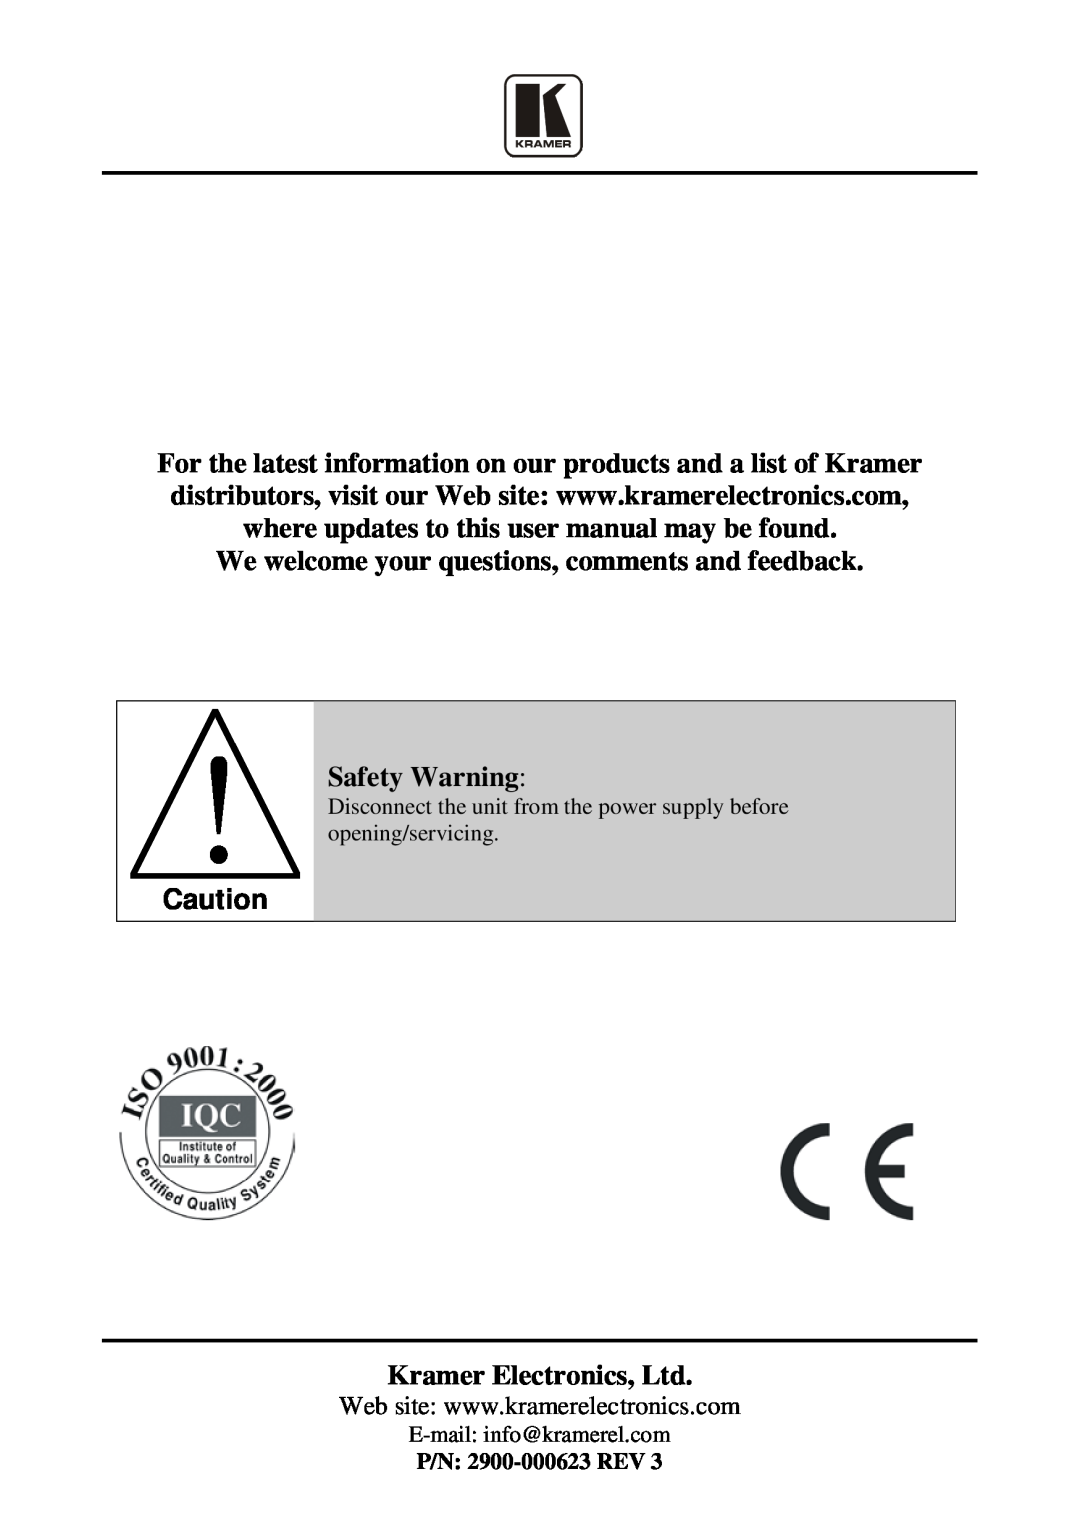 Kramer Electronics WP-500 user manual We welcome your questions, comments and feedback, Safety Warning, P/N 2900-000623REV 